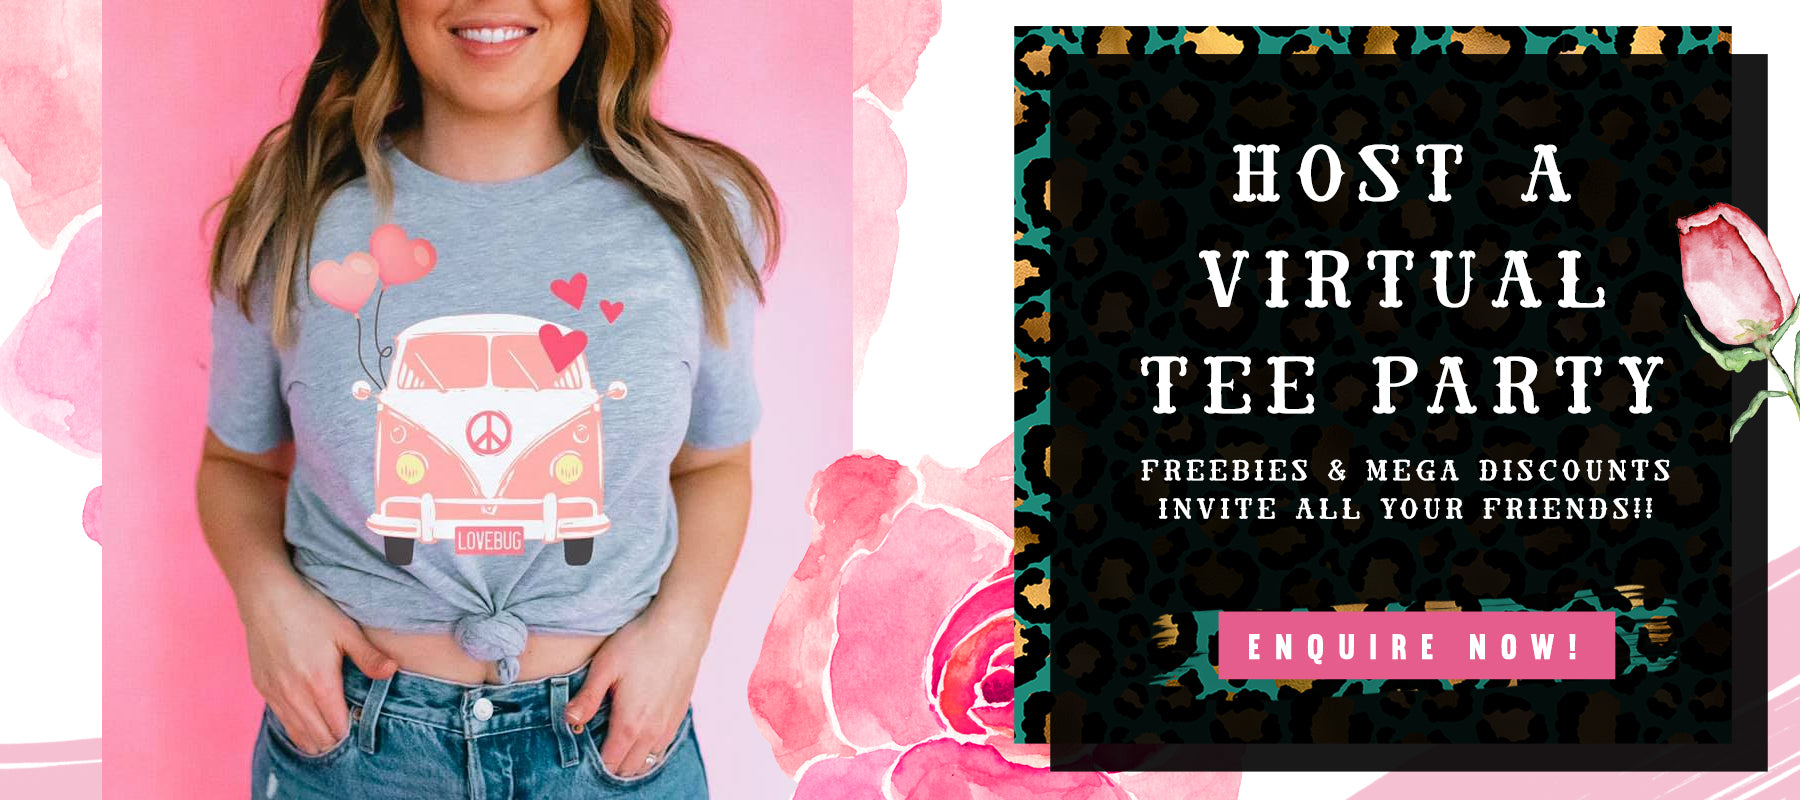 Host a virtual tee party. Freebies and mega discounts, invite all your friends! Enquire now!